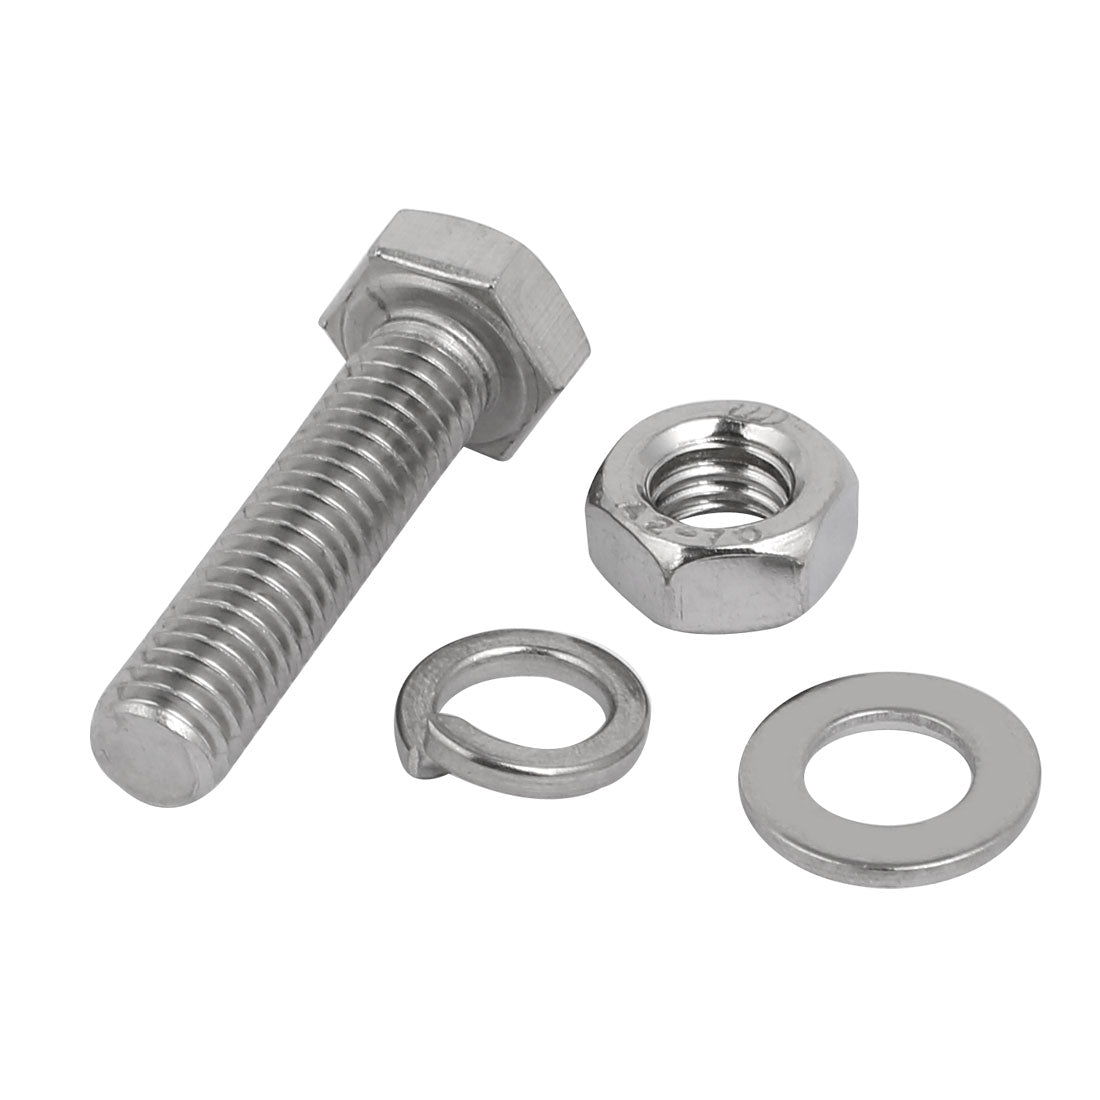 uxcell Uxcell 20pcs 304 Stainless Steel M6x25mm Hex Bolts w Nuts and Washers Assortment Kit